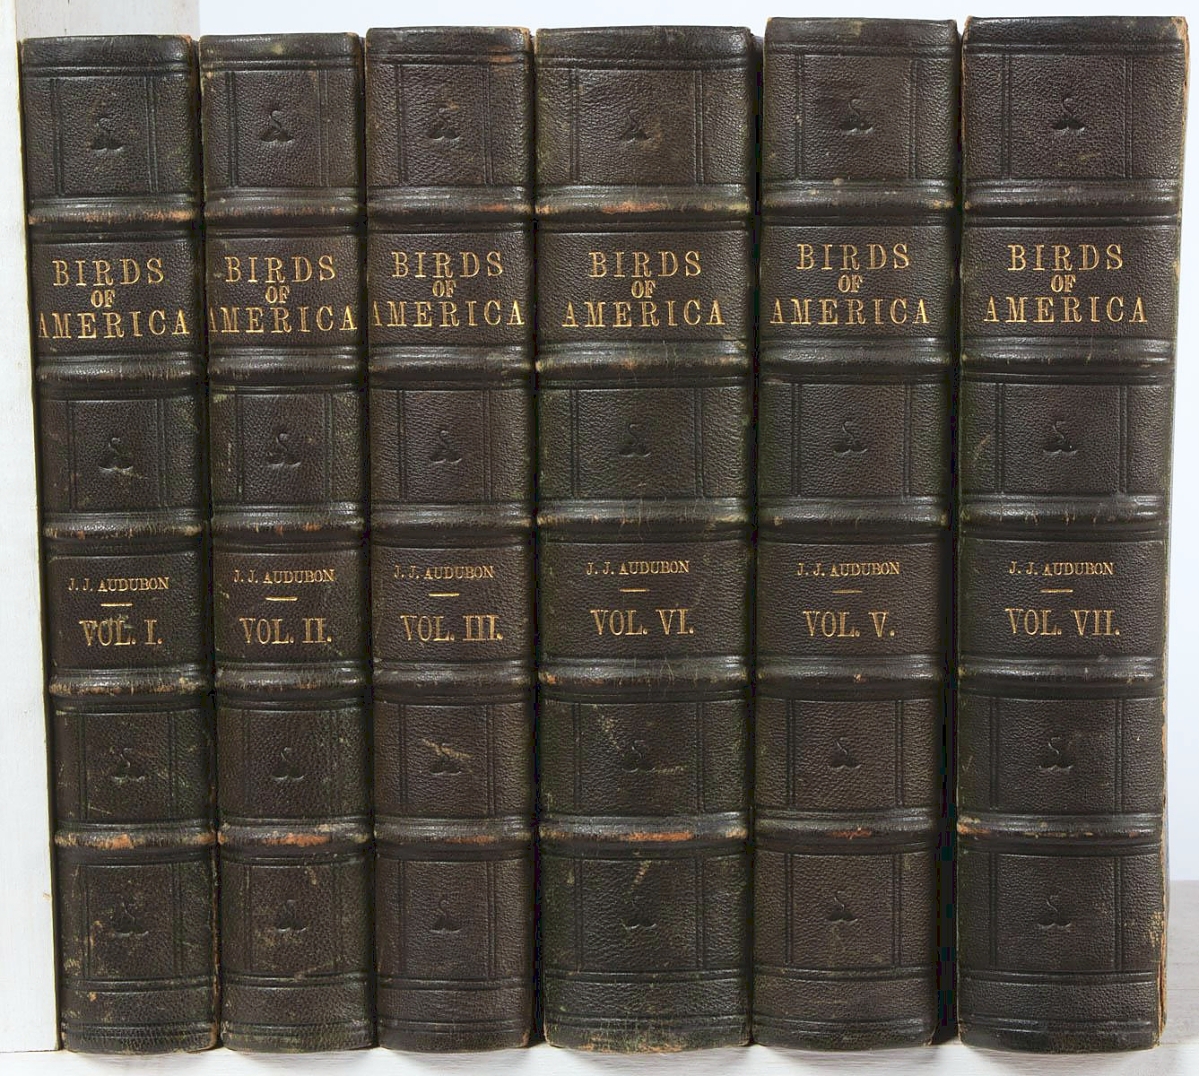 This set of The Birds of America, From Drawings Made in the United States and Their Territories” by John James Audubon was missing one volume but was otherwise largely complete. It had originally been purchased in the 1840s by the Tayloe family of Virginia and was being deaccessioned by the Valentine Museum, Richmond, Va. It flew to an online buyer for $26,290 ($3/5,000).